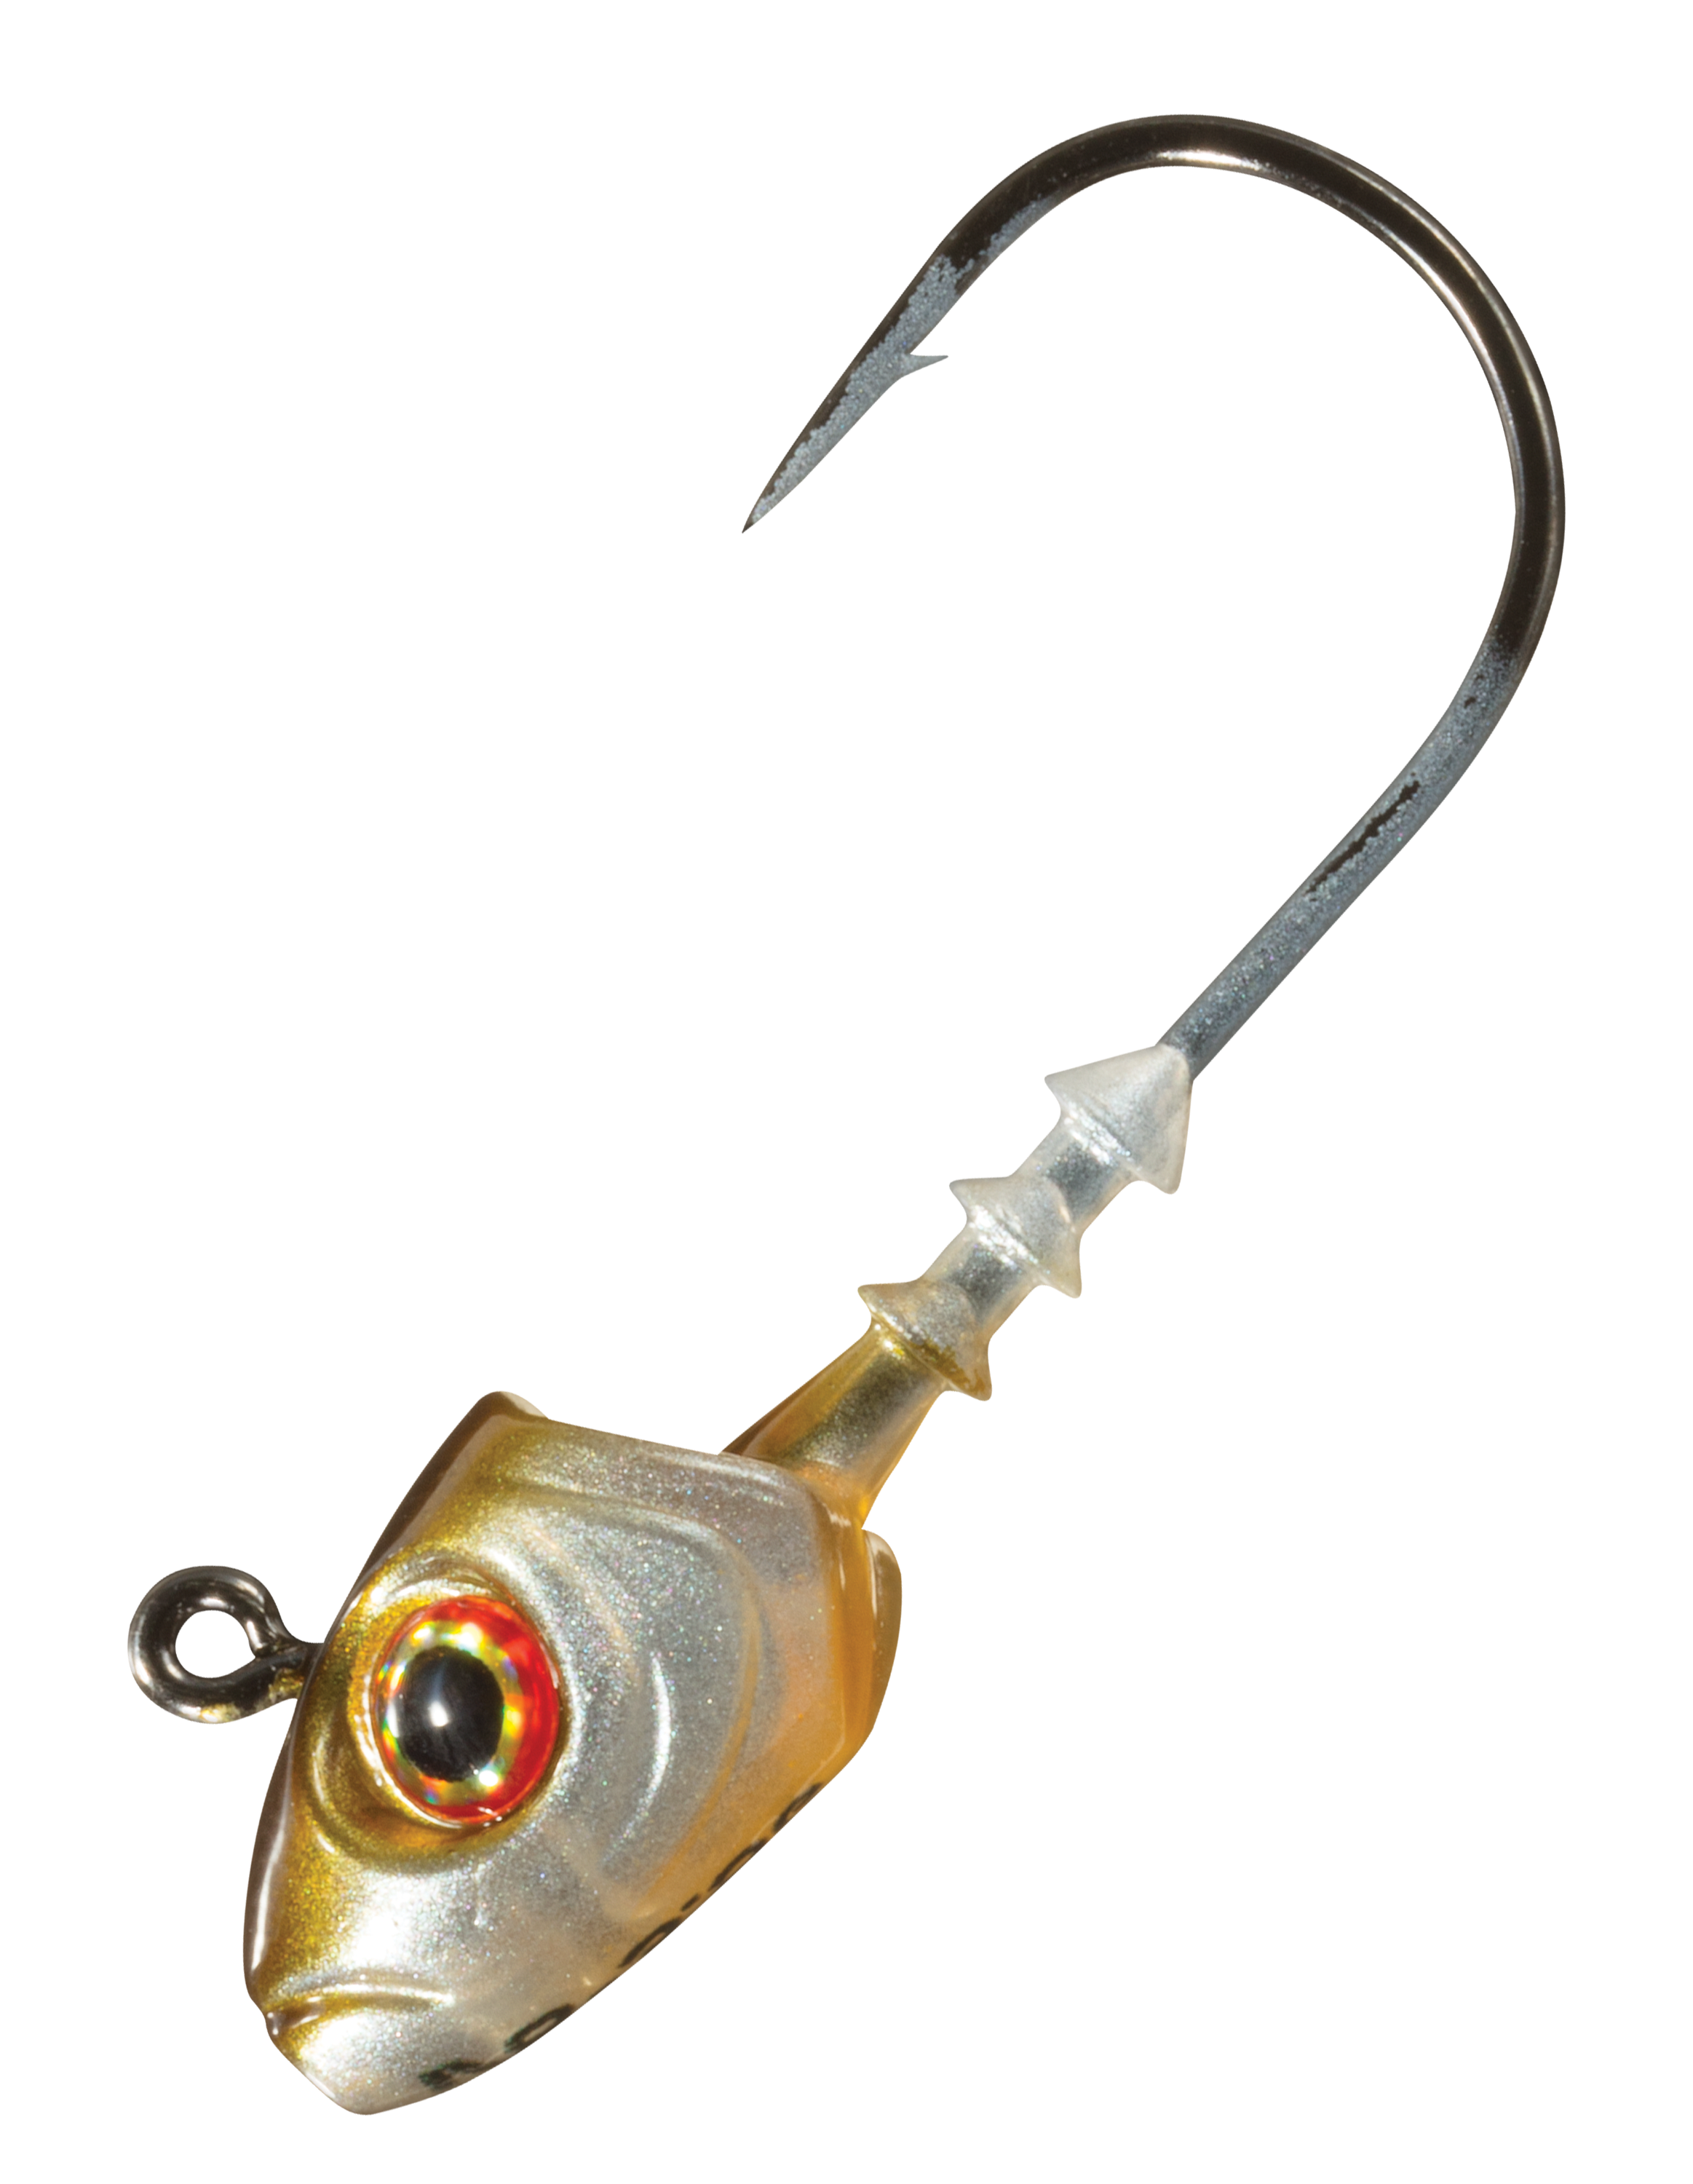 Storm Lures' 360GT Searchbait - In-Fisherman